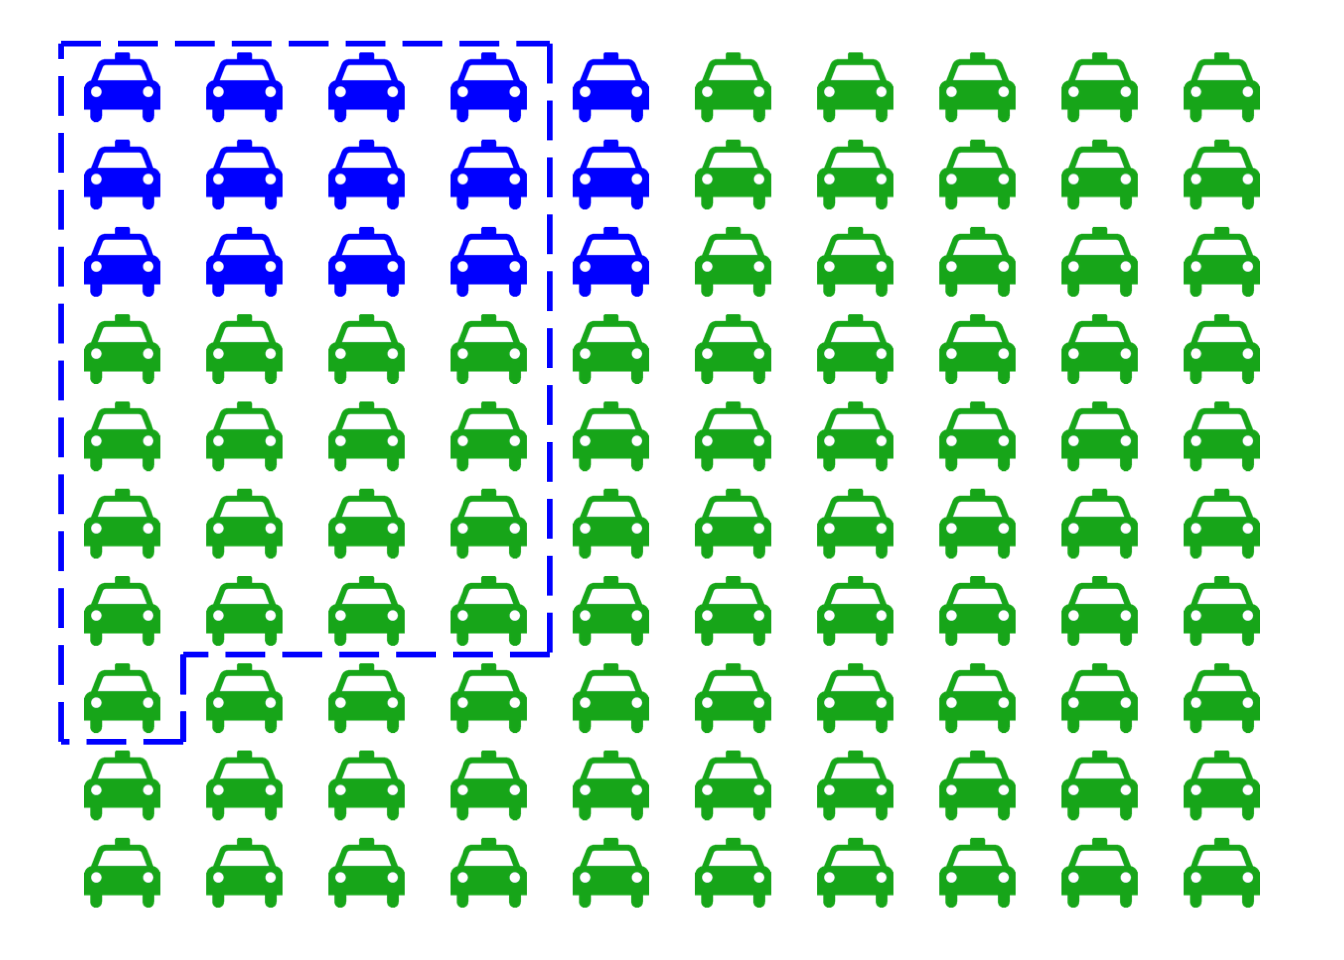 The taxicab problem. There are $15$ blue cabs, $85$ green. The dashed region indicates those cabs the witness identifies as "blue." It includes $80\%$ of the blue cabs ($12$), and only $20\%$ of the green ones ($17$). Yet it includes more green cabs than blue.